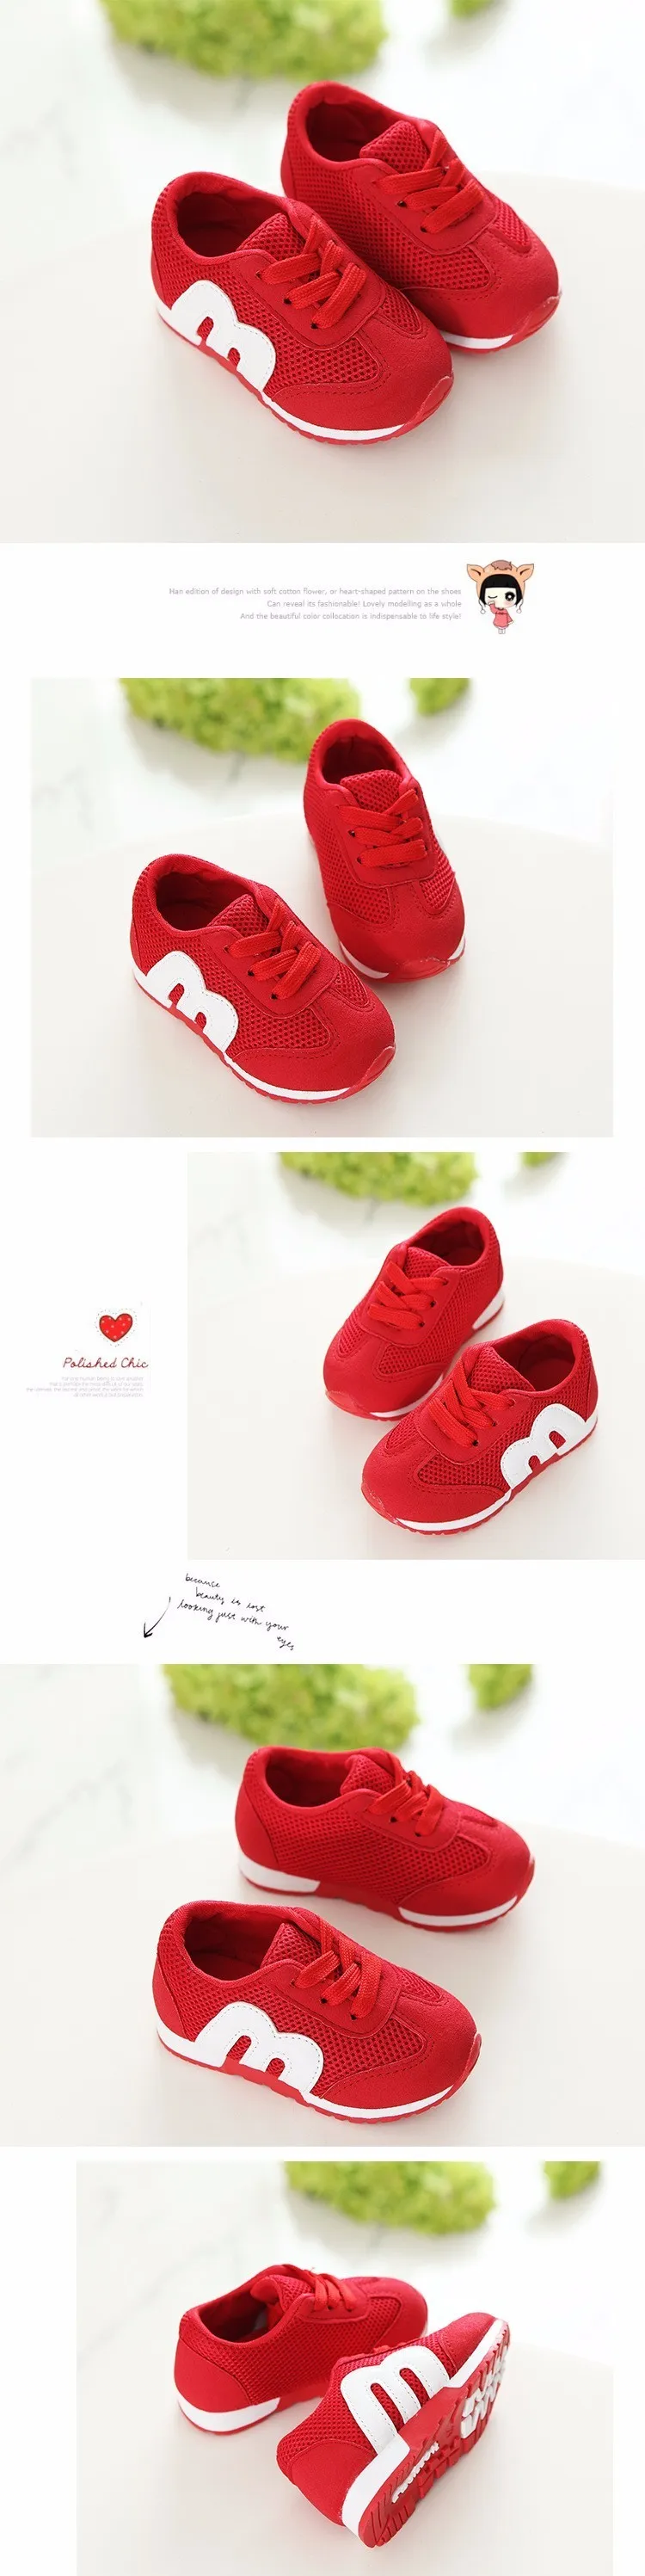 x6 baby shoes size